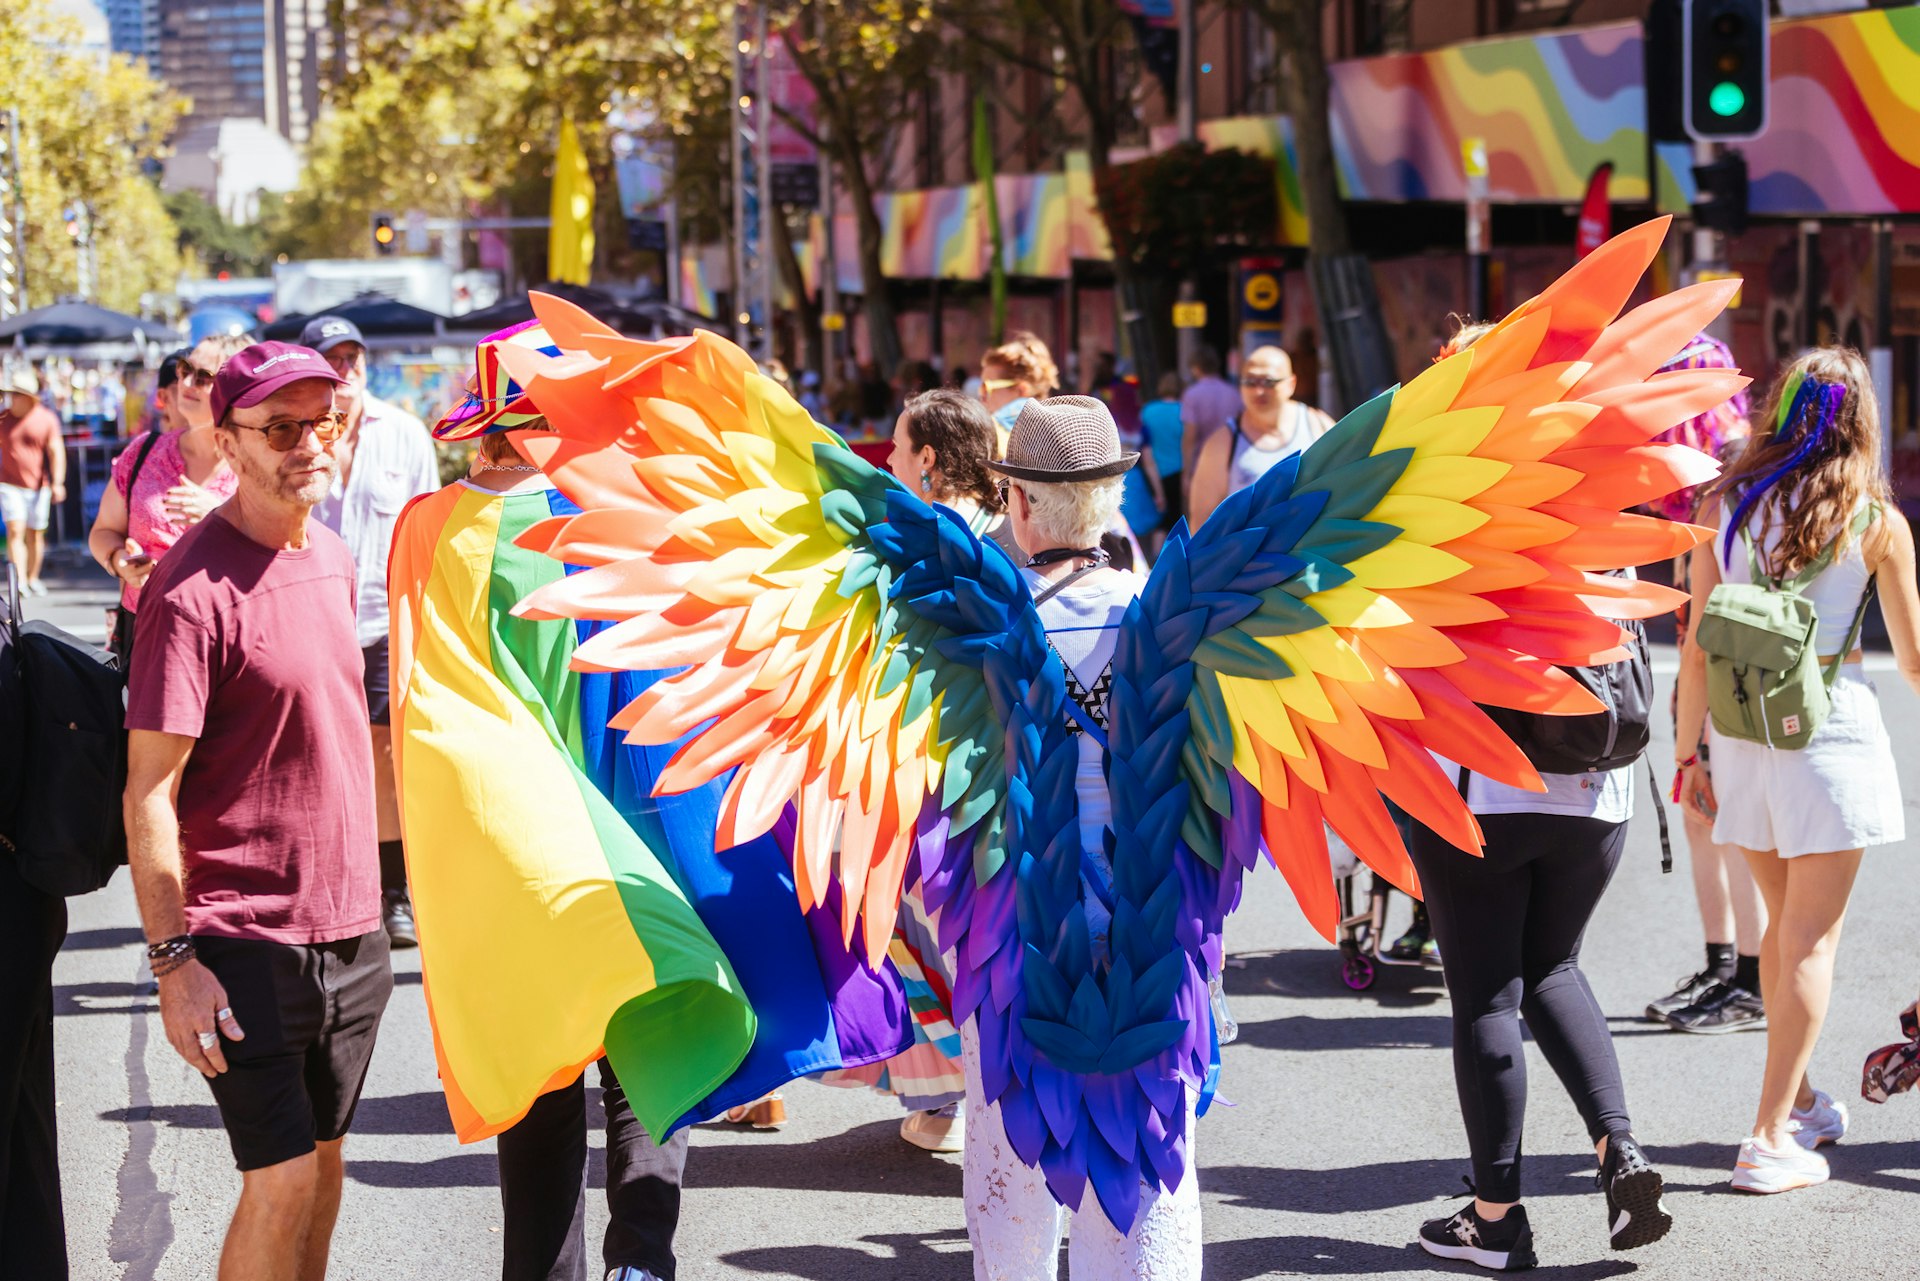 A carnival-goer is dressed up for the parade, with elaborate, colorful wings on their back